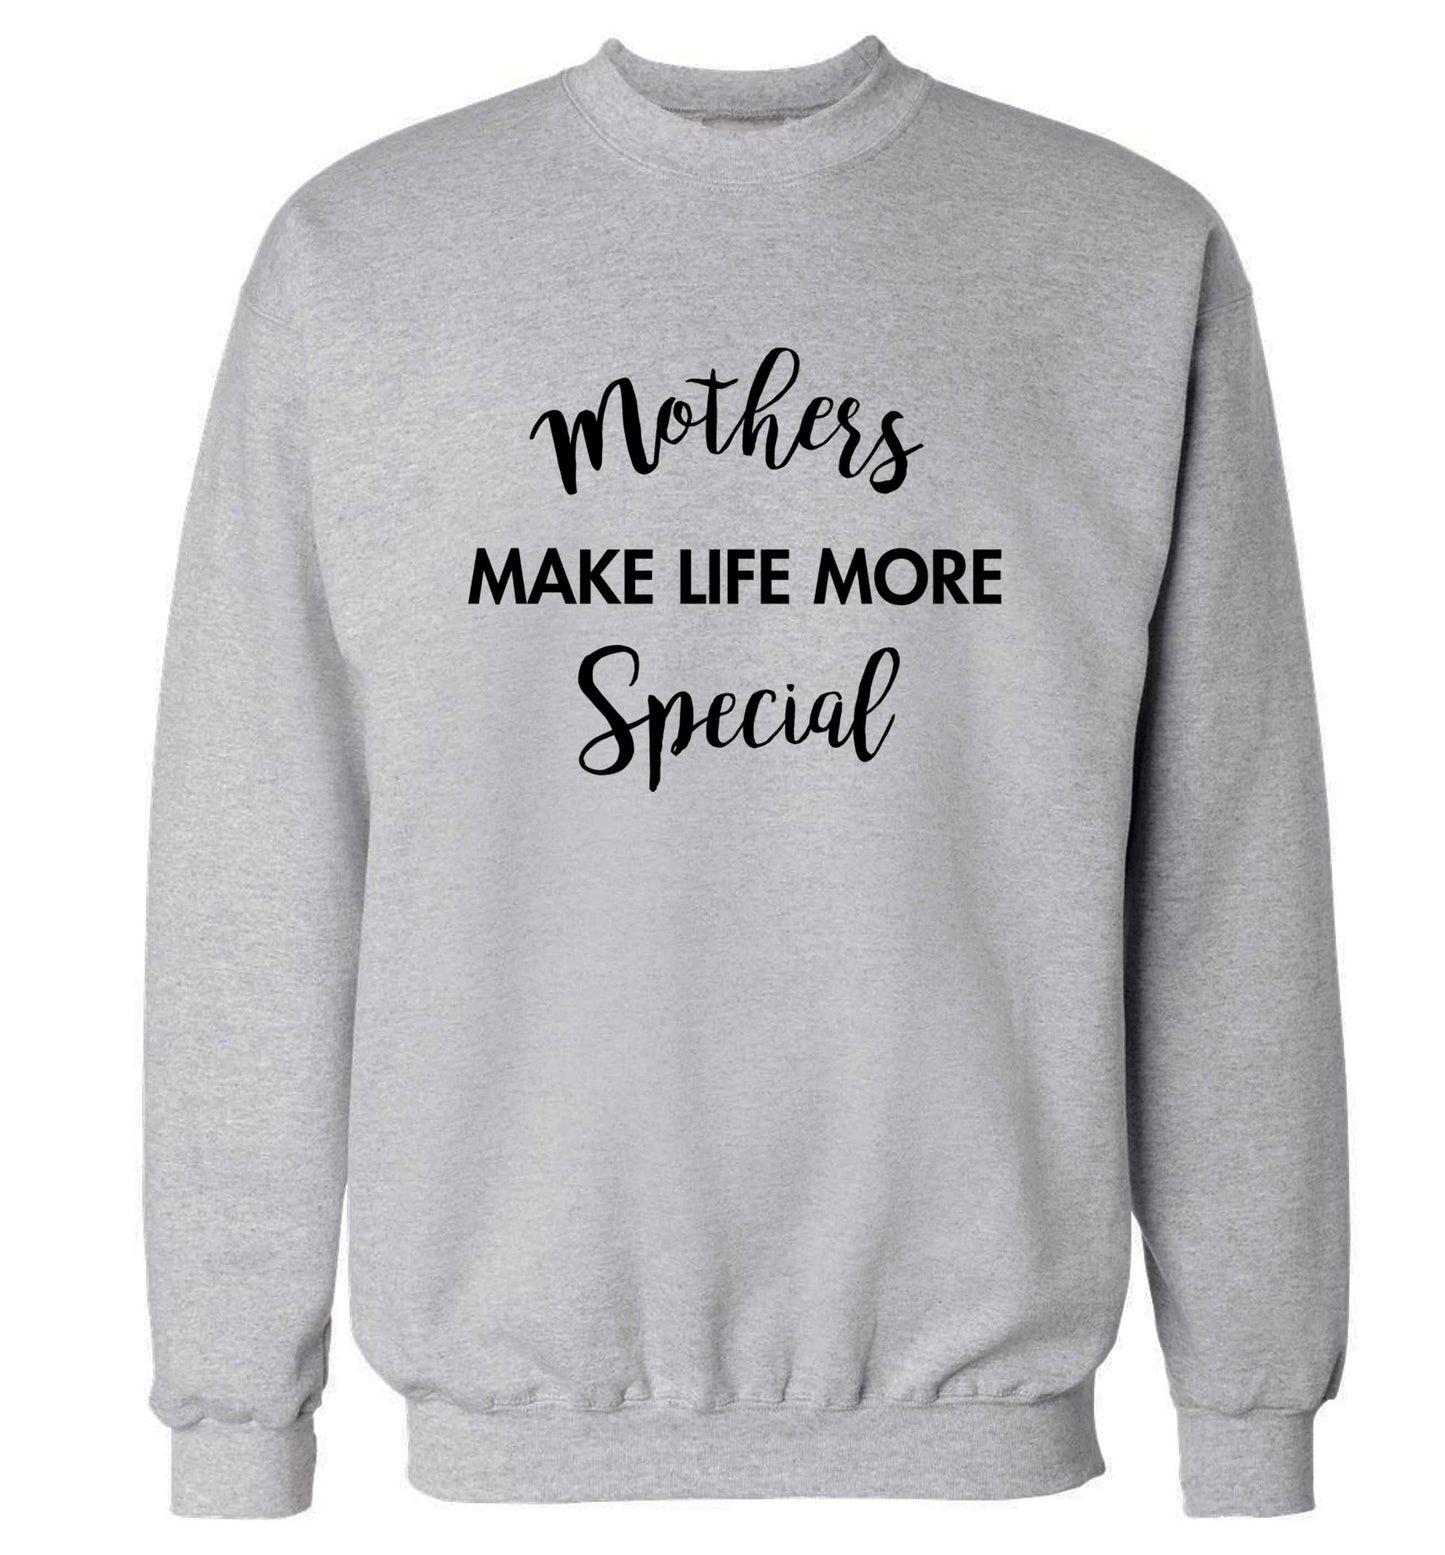 Mother's make life more special adult's unisex grey sweater 2XL